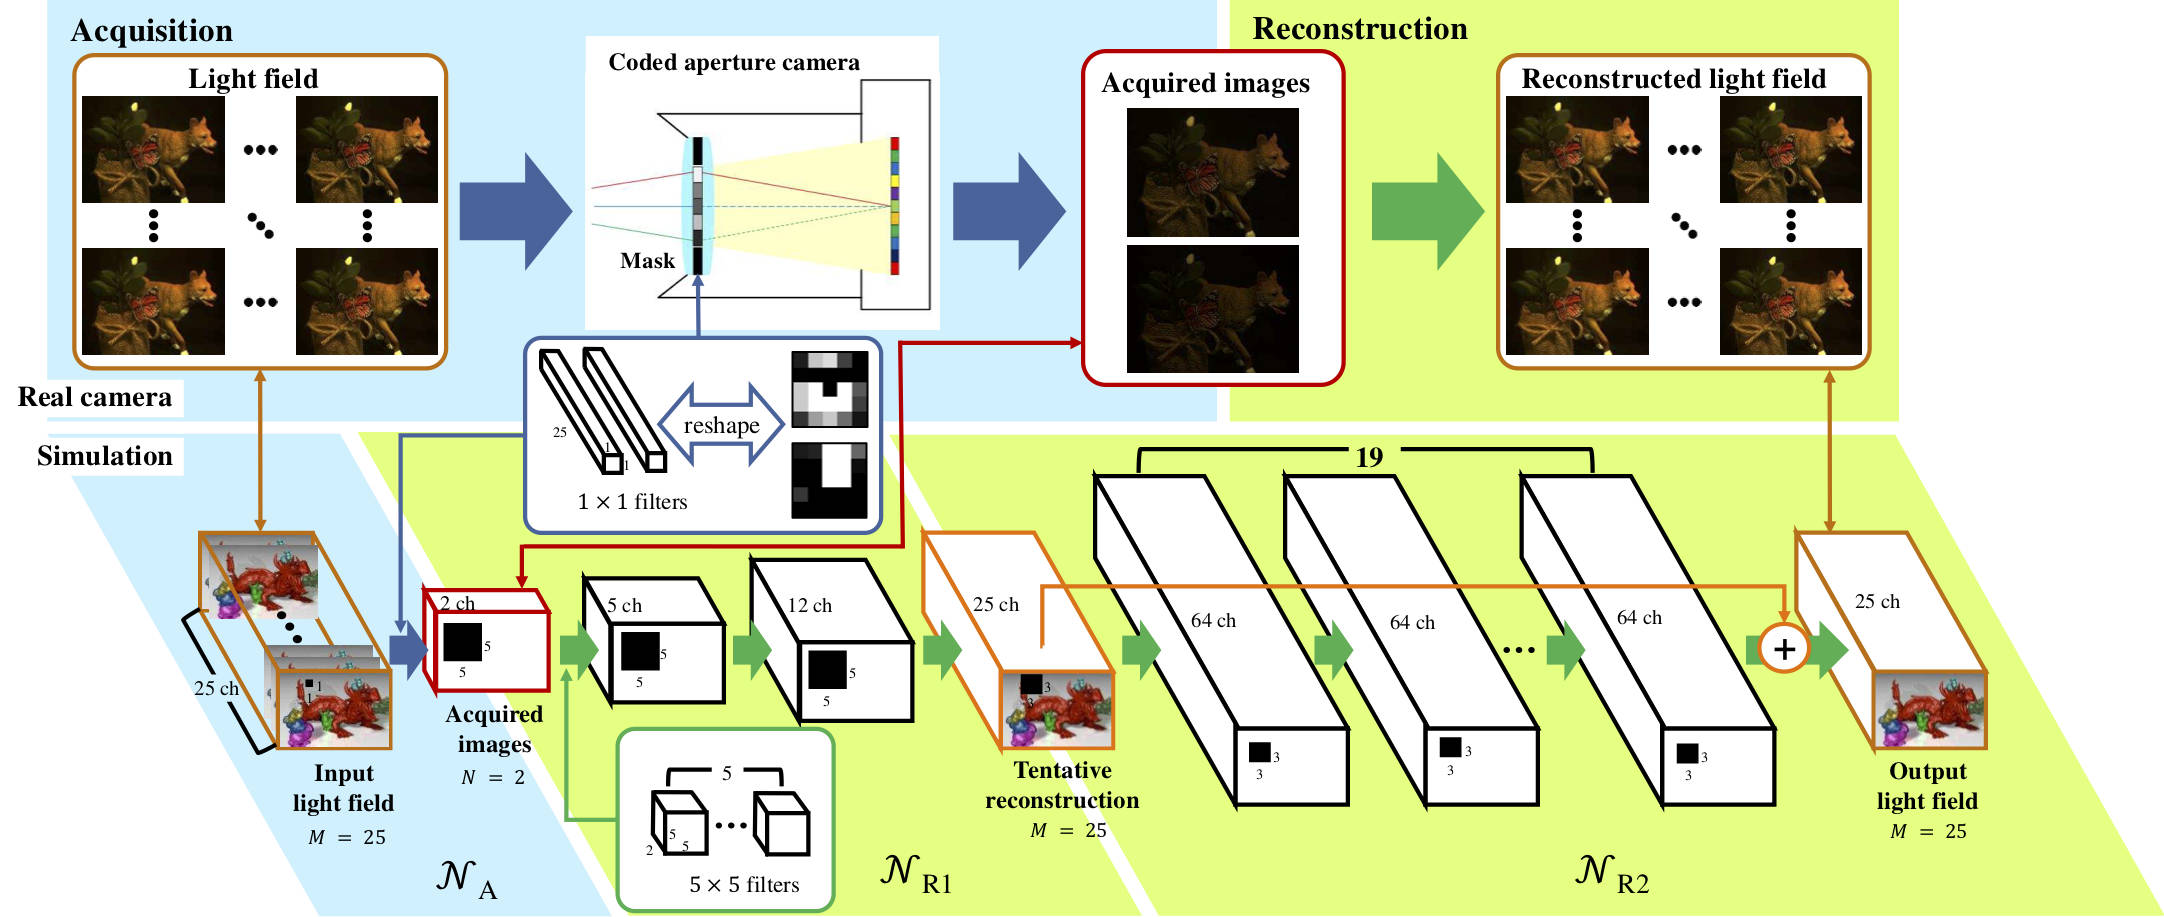 Our neural network models the entire pipeline from capture to computational reconstruction of 3-D visual information